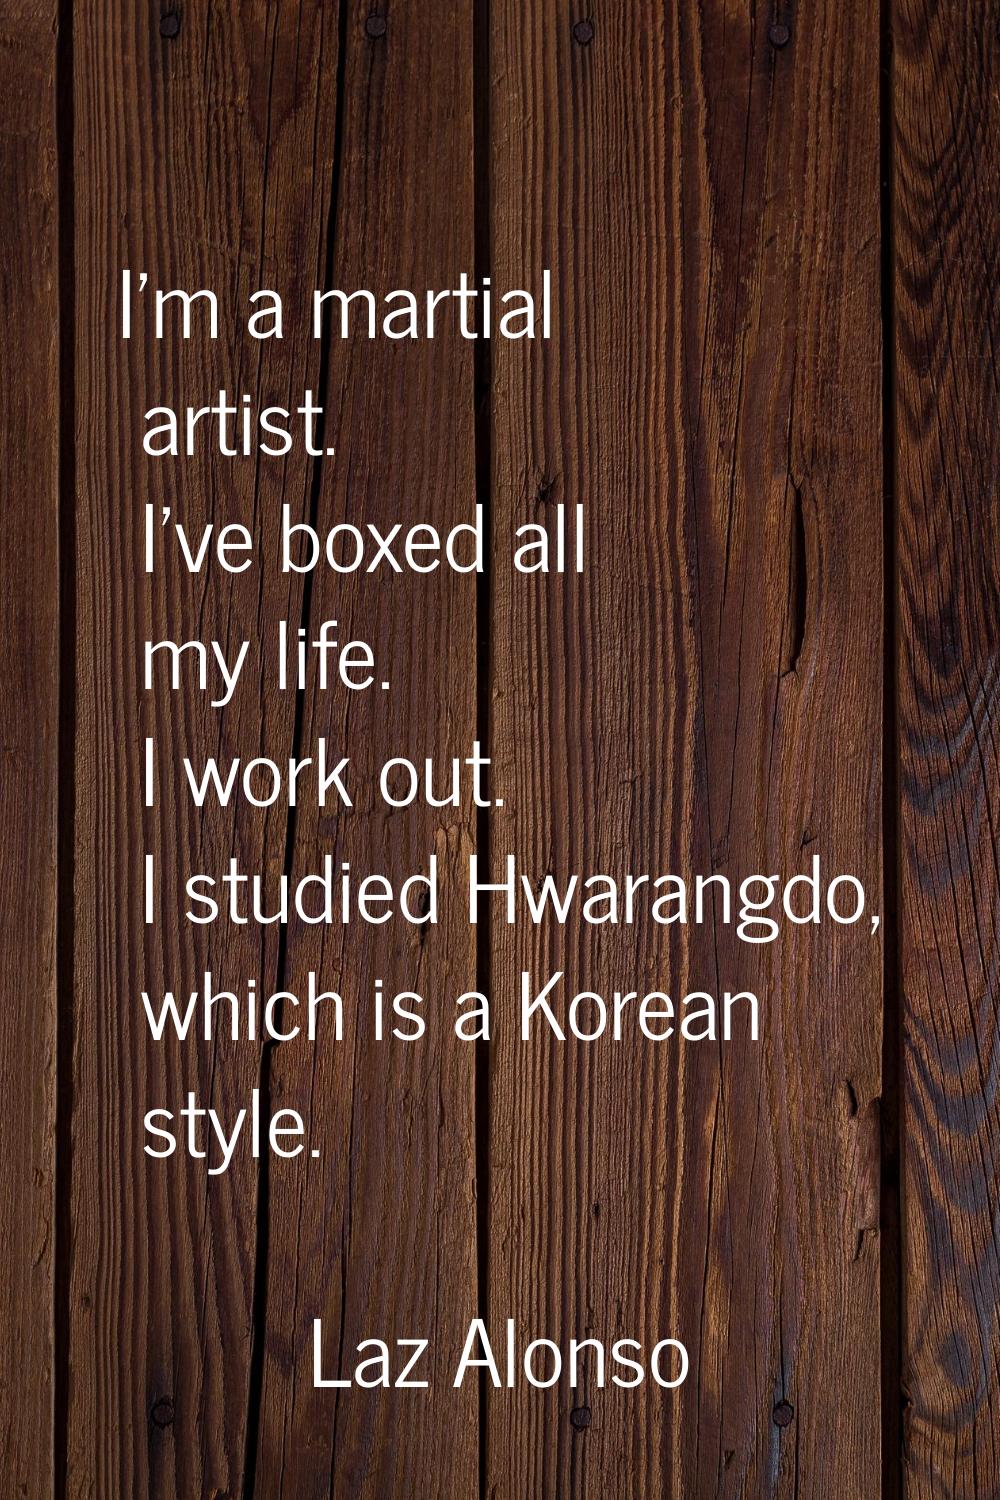 I'm a martial artist. I've boxed all my life. I work out. I studied Hwarangdo, which is a Korean st